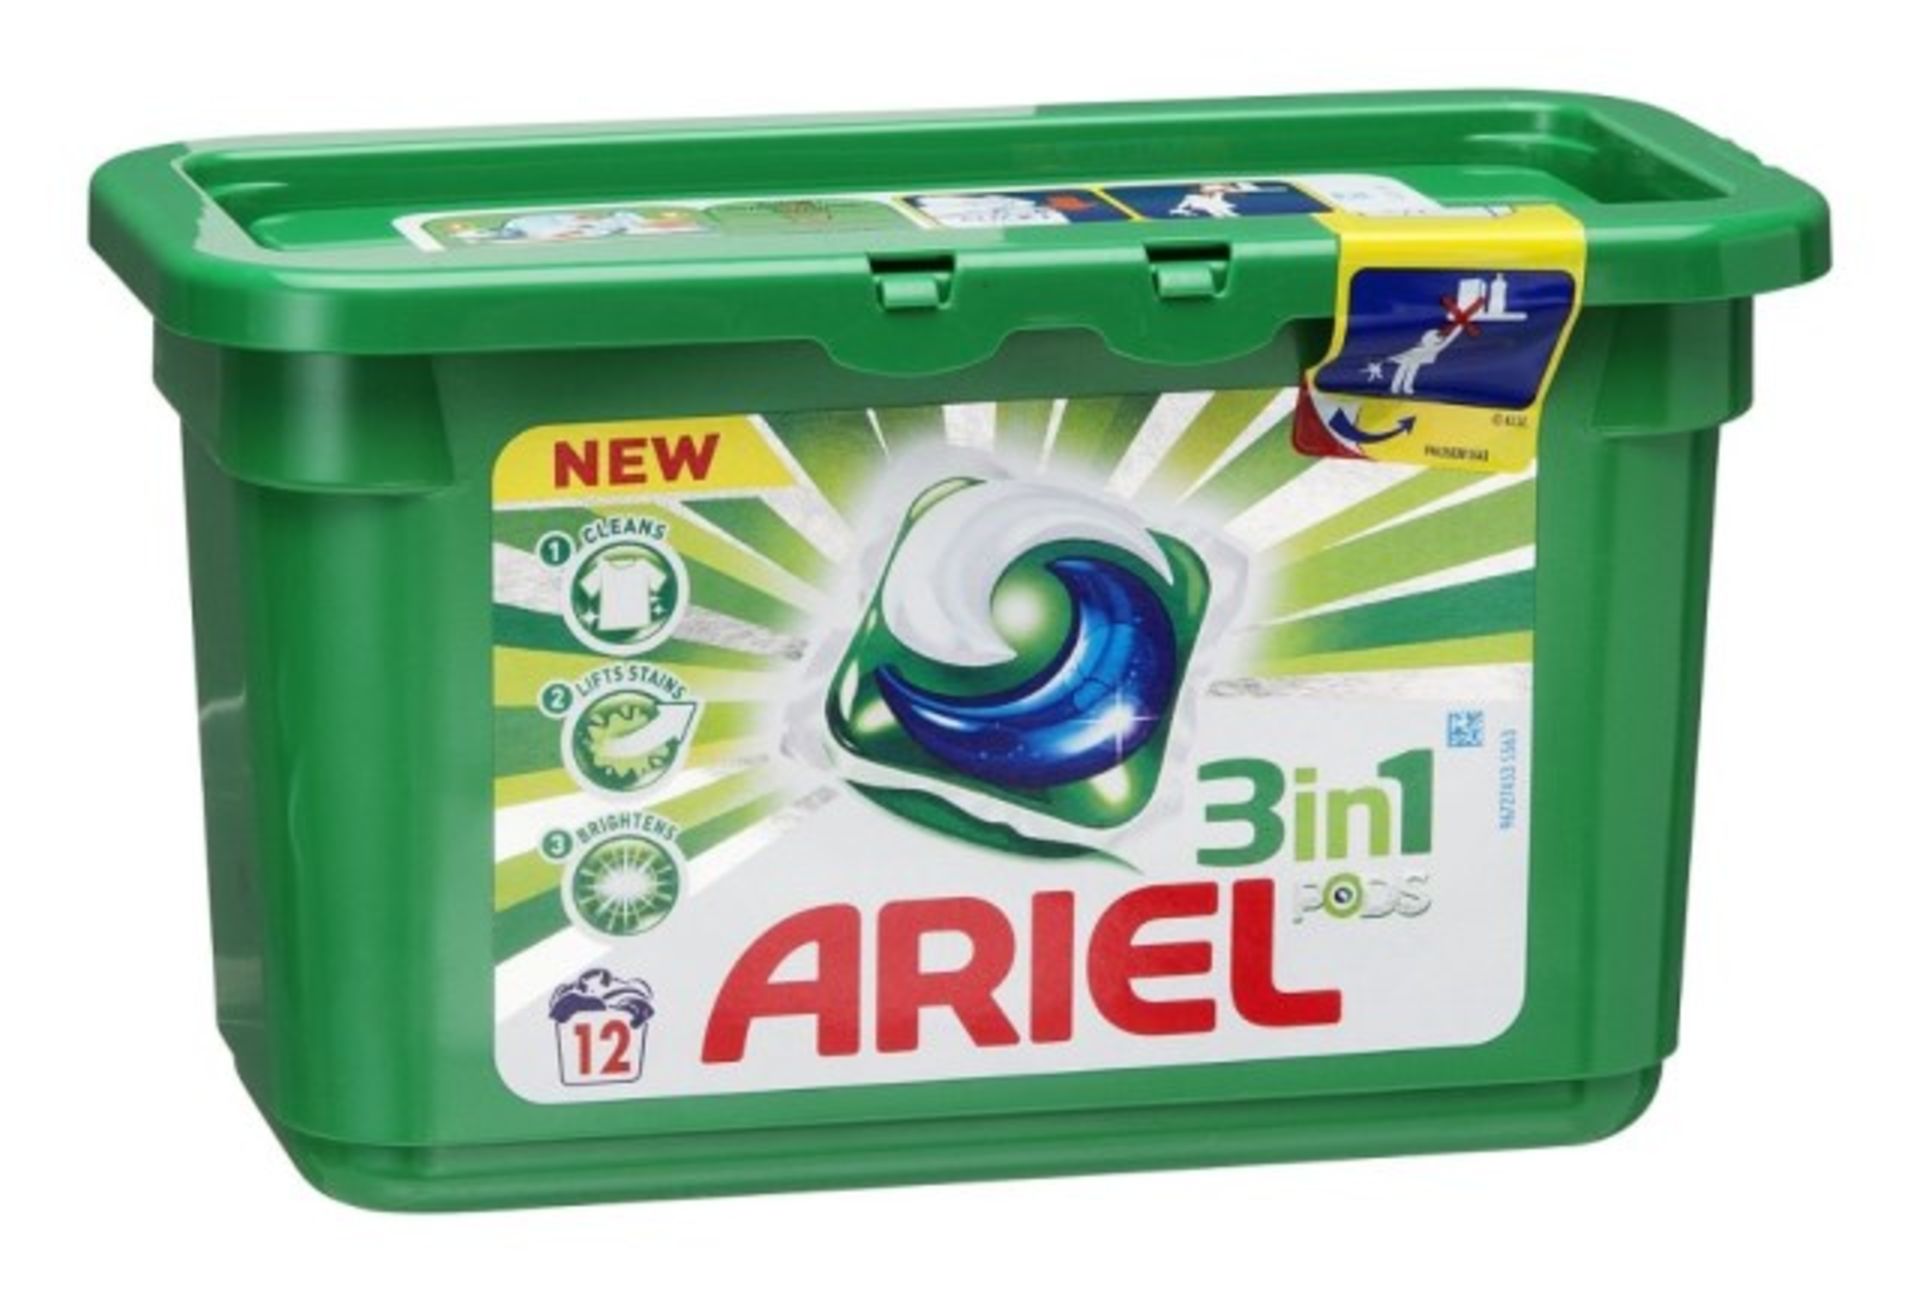 V *TRADE QTY* Brand New Ariel 3 in 1 Pods 12 Wash Pack RRP8.99 X120 YOUR BID PRICE TO BE